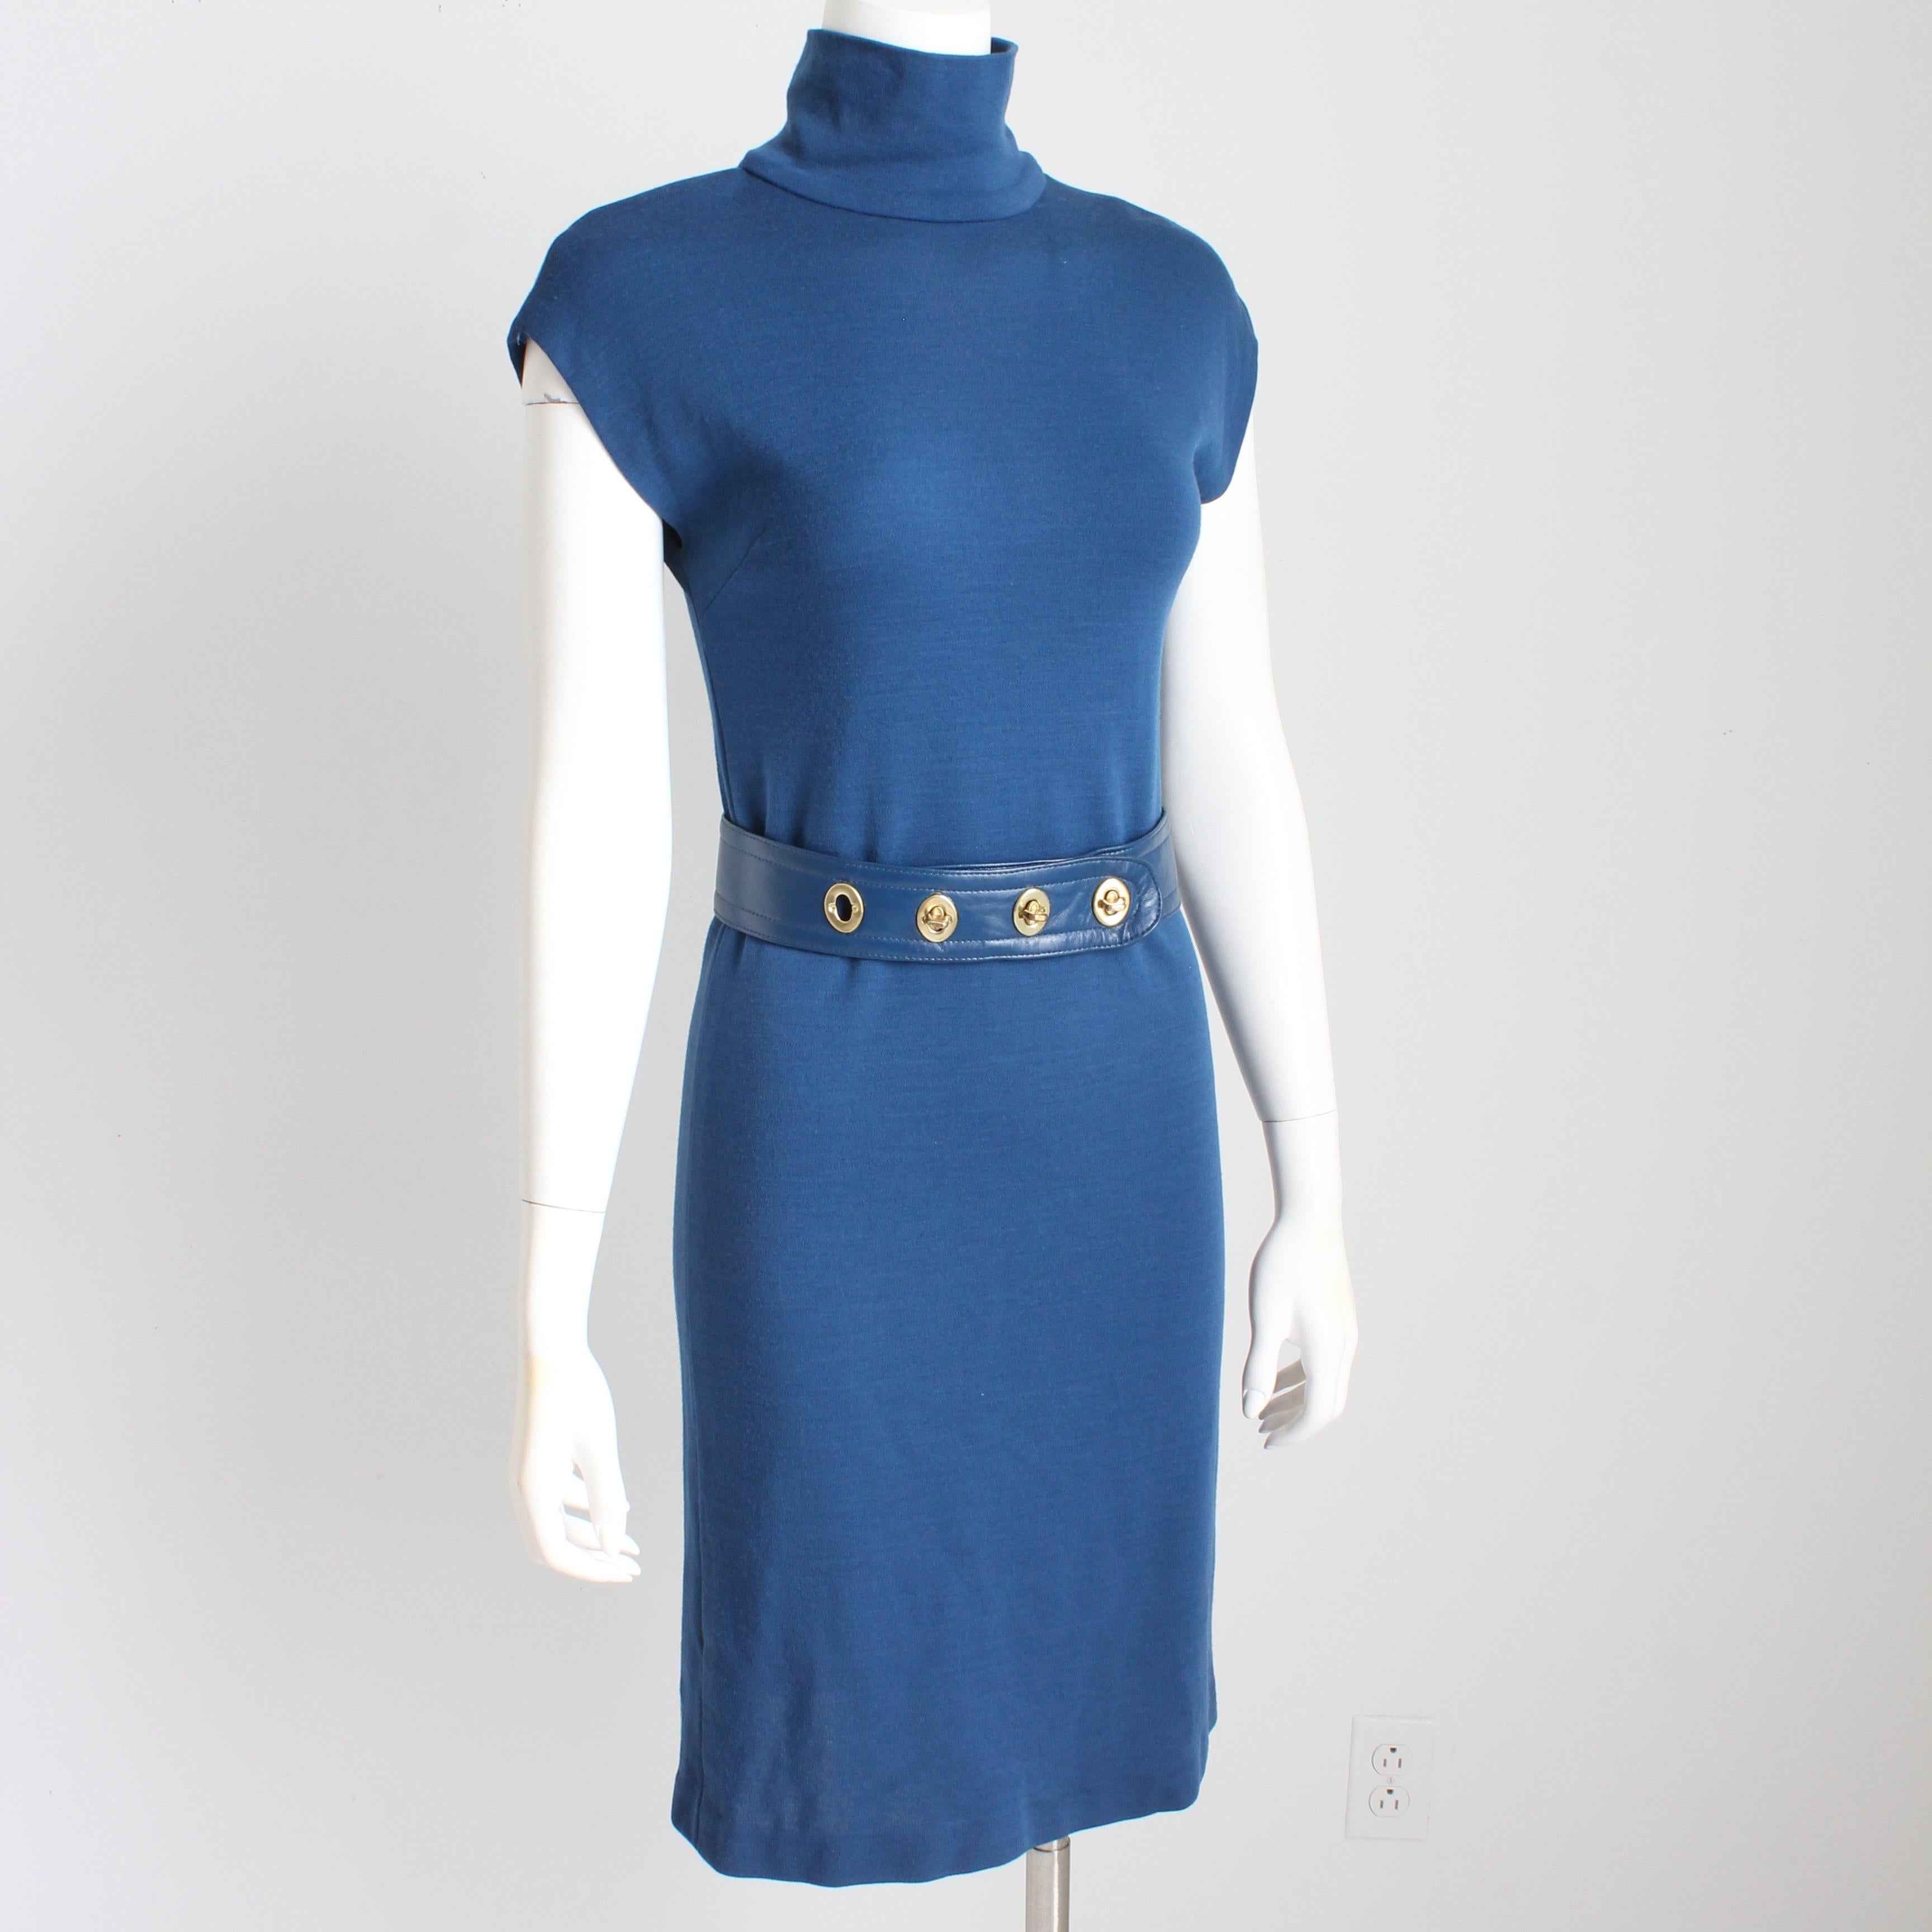 Bonnie Cashin for Sills Dress and Turnlock Belt 2pc Set Wool Leather Vintage HTF In Good Condition For Sale In Port Saint Lucie, FL